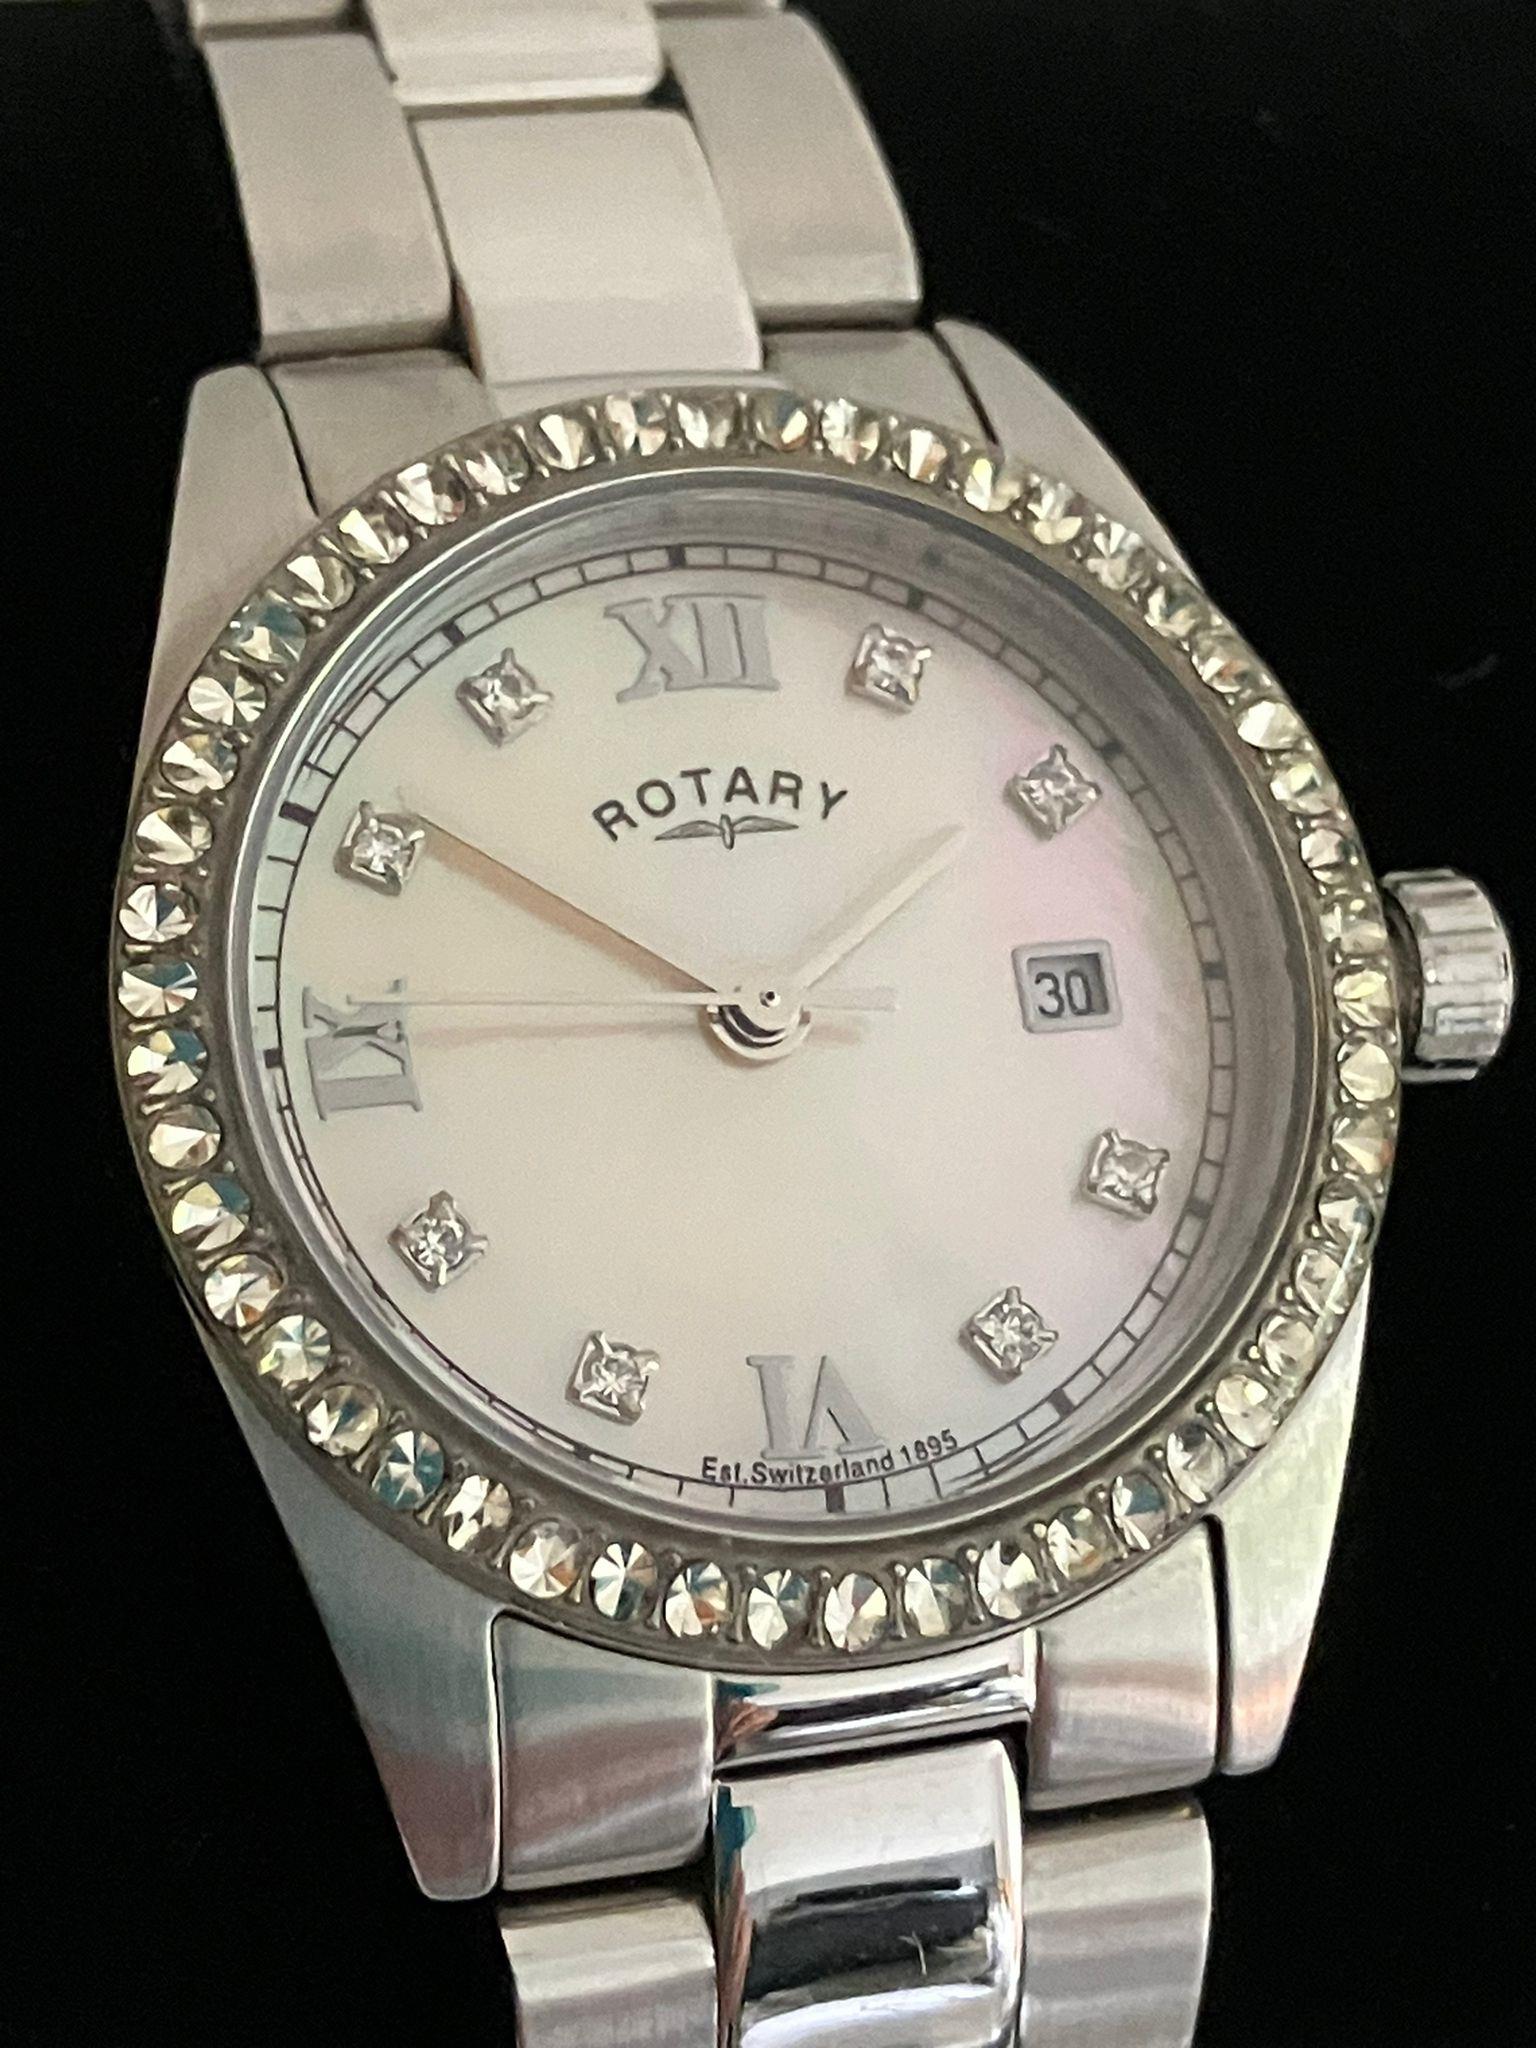 Ladies ROTARY HAVANA QUARTZ WRISTWATCH. Mother of pearl face with date window and sweeping second